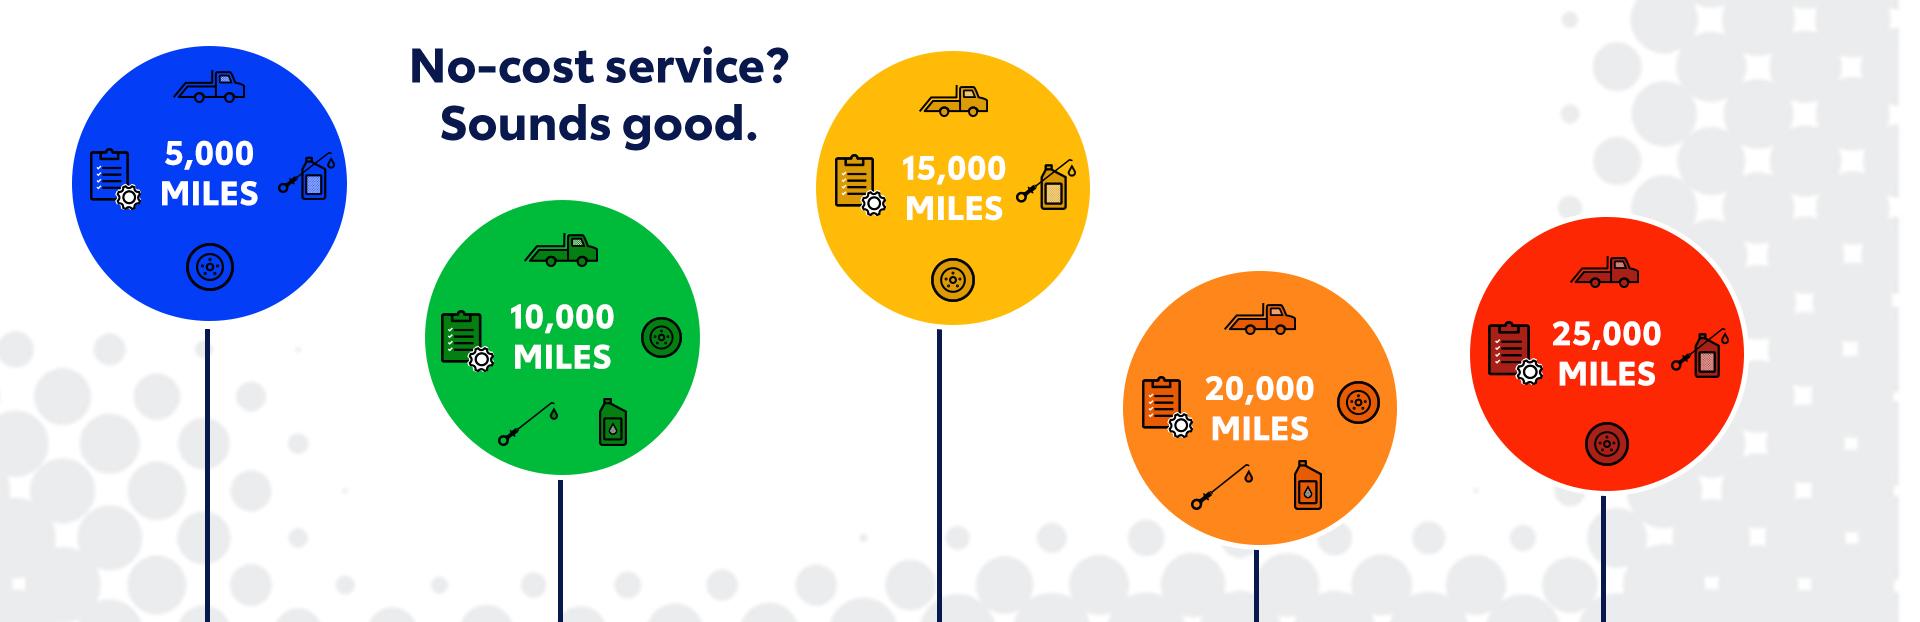 Toyotacare no-cost service? sounds good. 5,000 miles, 10,000 miles, 15,000 miles, 20,000 miles, 25,000 miles